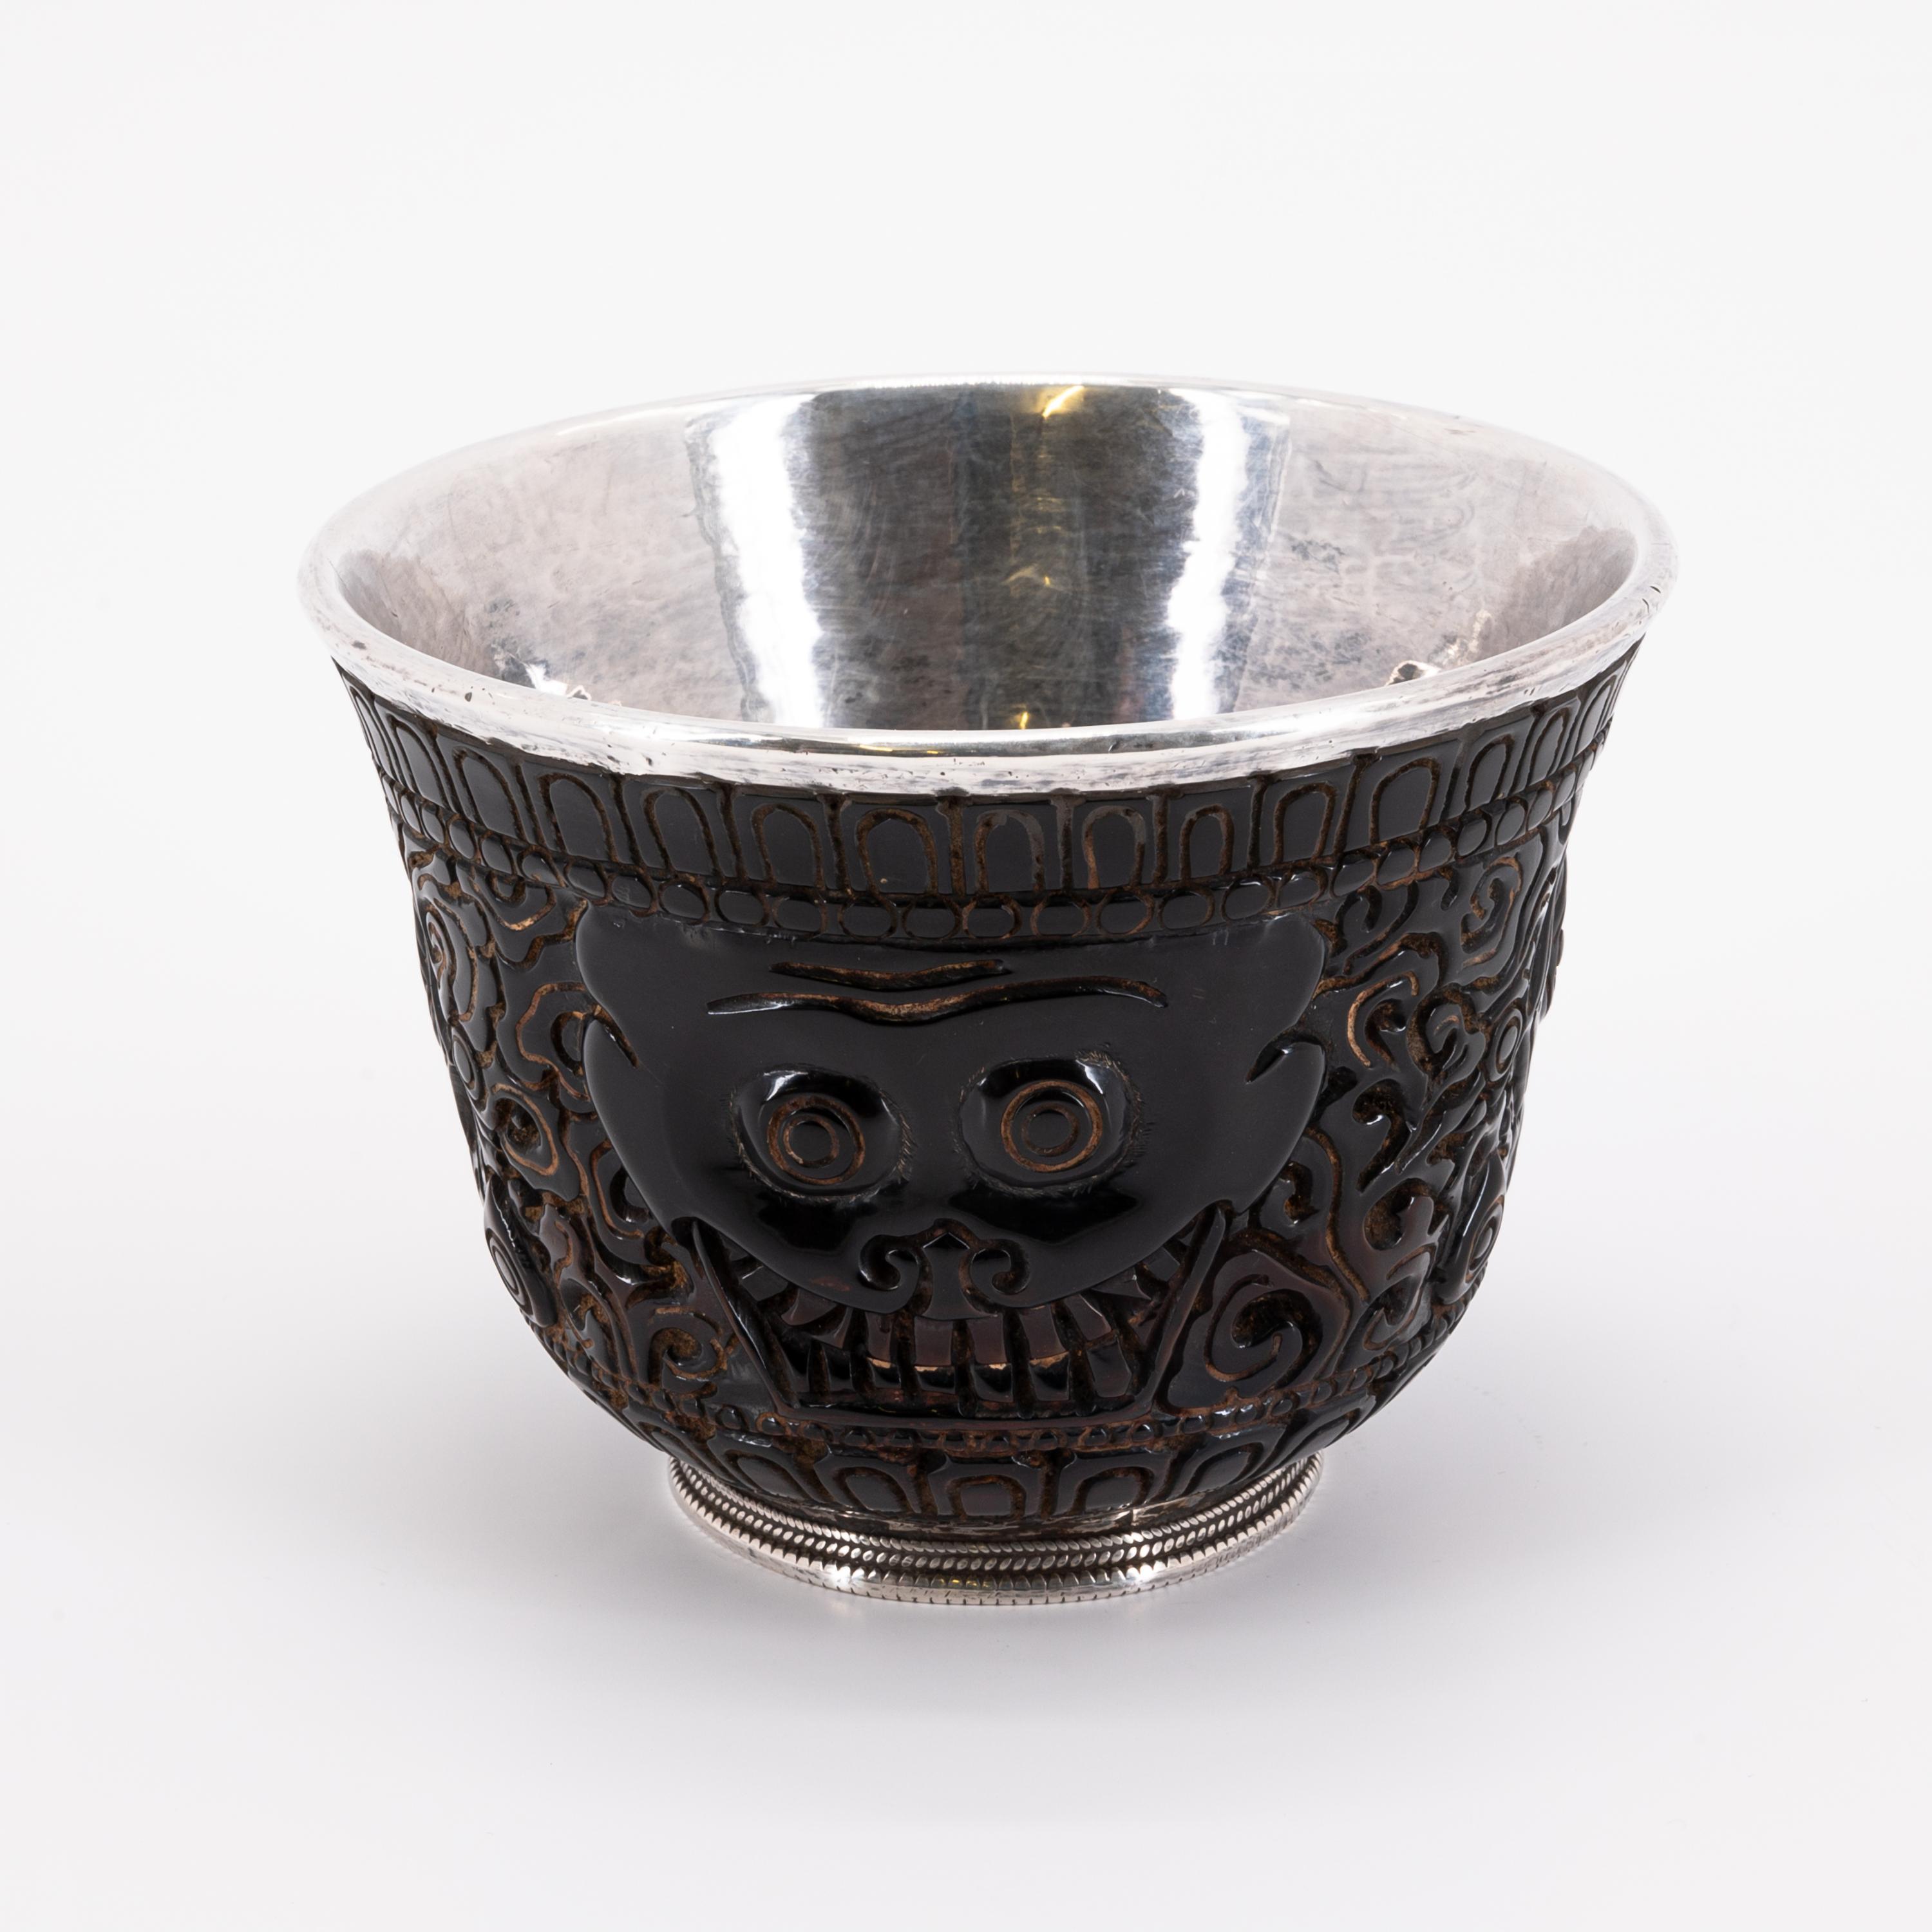 AMBER RITUAL VESSEL WITH FACES AND ORNAMENTAL DECORATION - Image 3 of 6